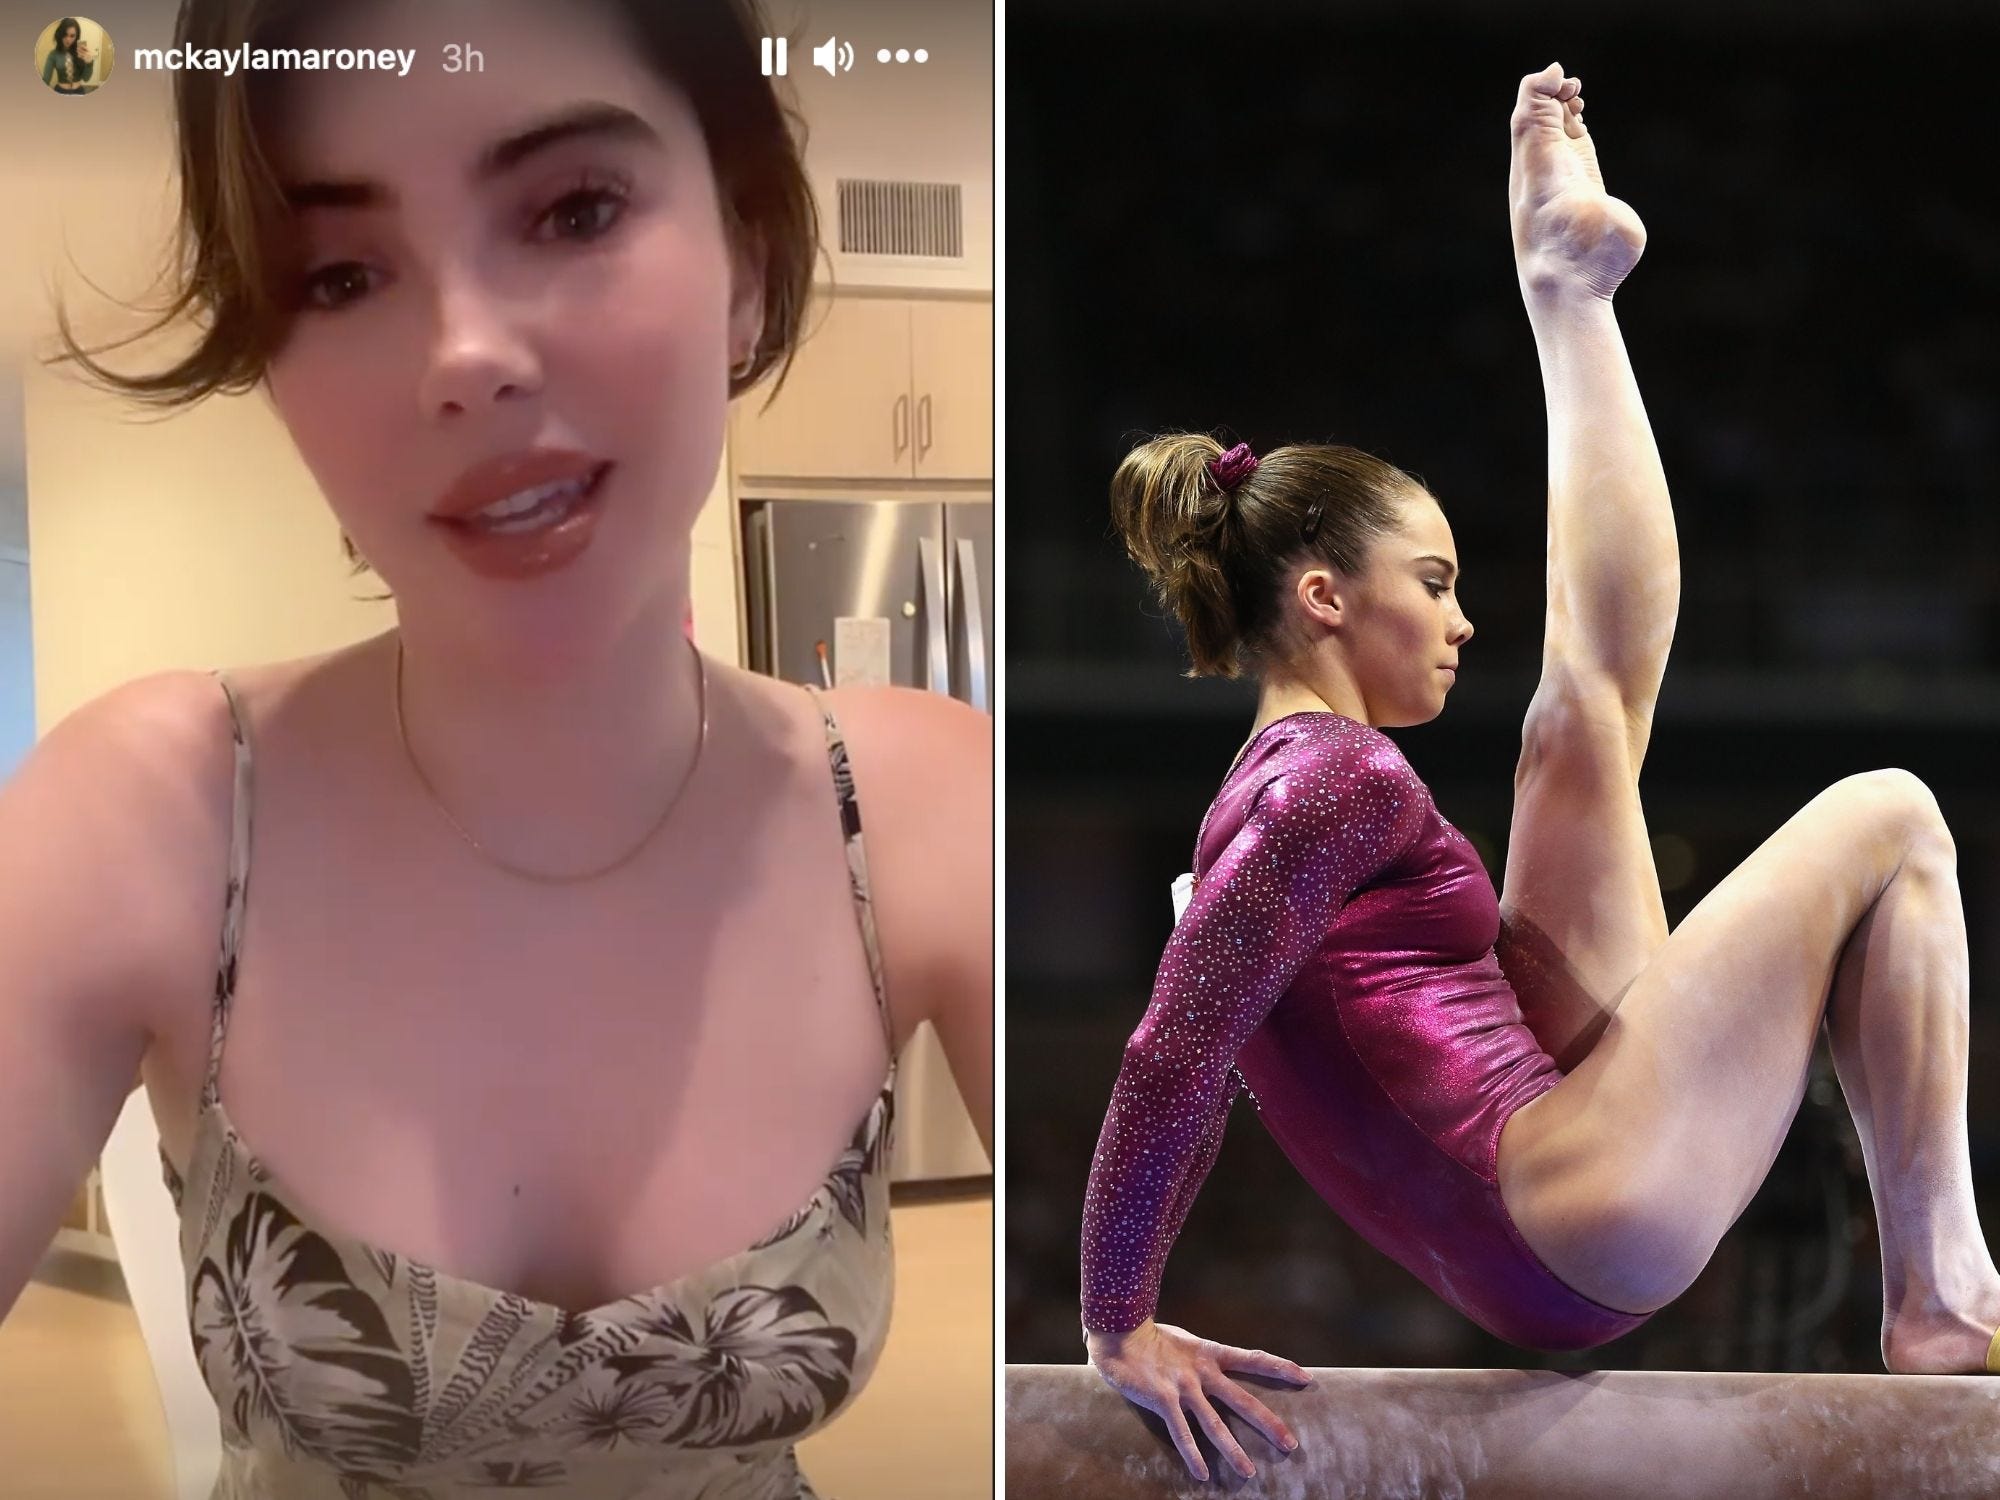 McKayla Maroney in a screenshot of her Instagram story (left). Maroney in 2012 (right) at the US Team Olympic trials.